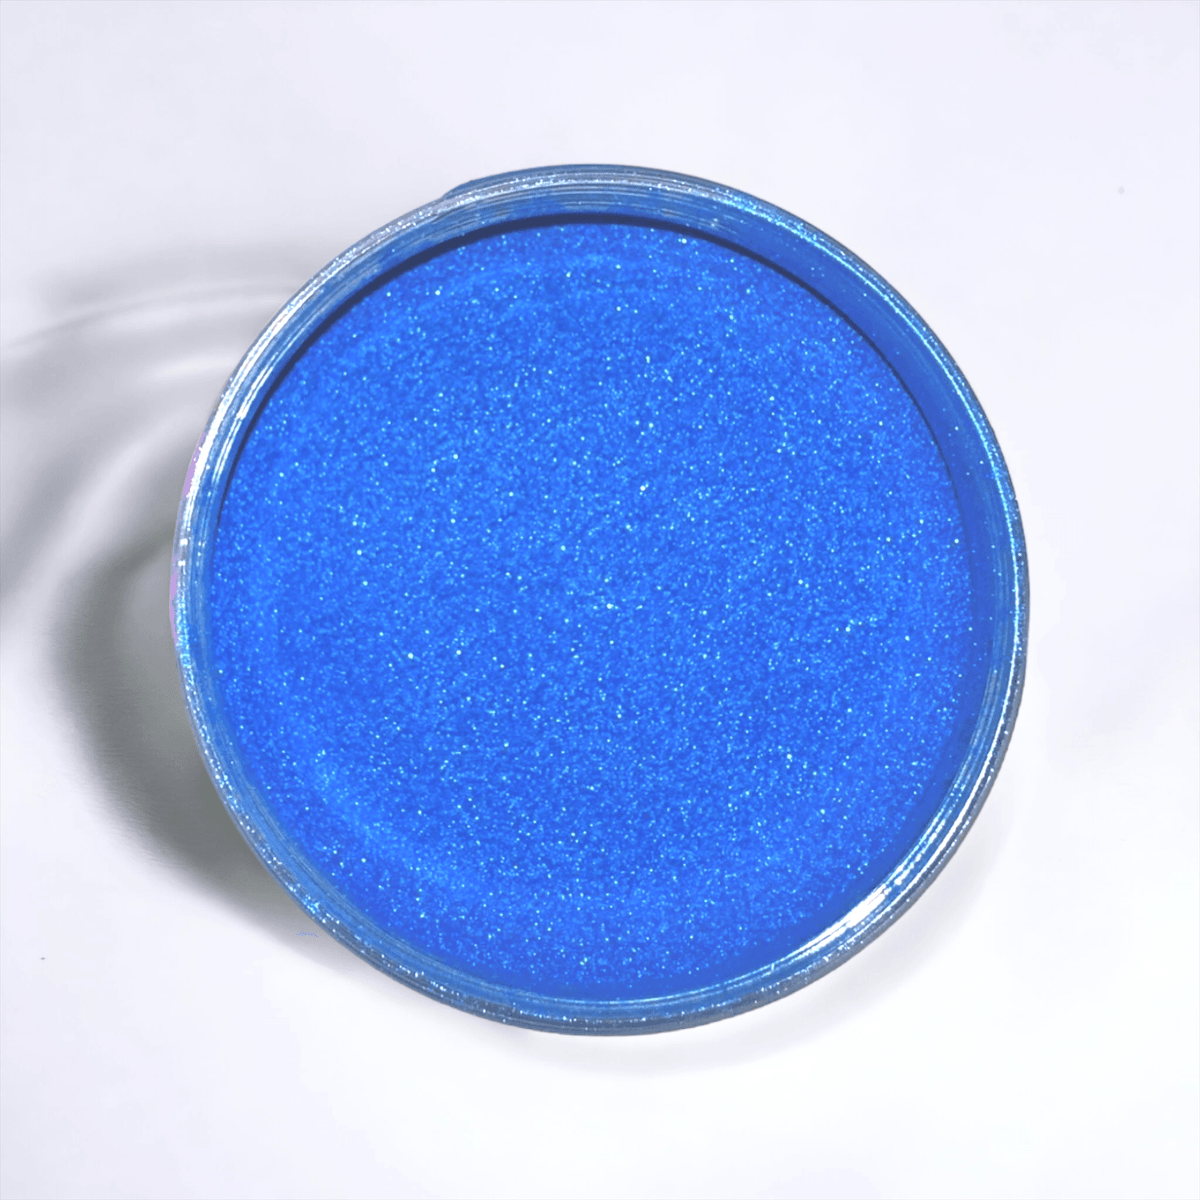 Neon Blue Mica Powder - Craftiful Fragrance Oils - Supplies for Wax Melts, Candles, Room Sprays, Reed Diffusers, Bath Bombs, Soaps, Perfumes, Bath Salts and Body Sprays